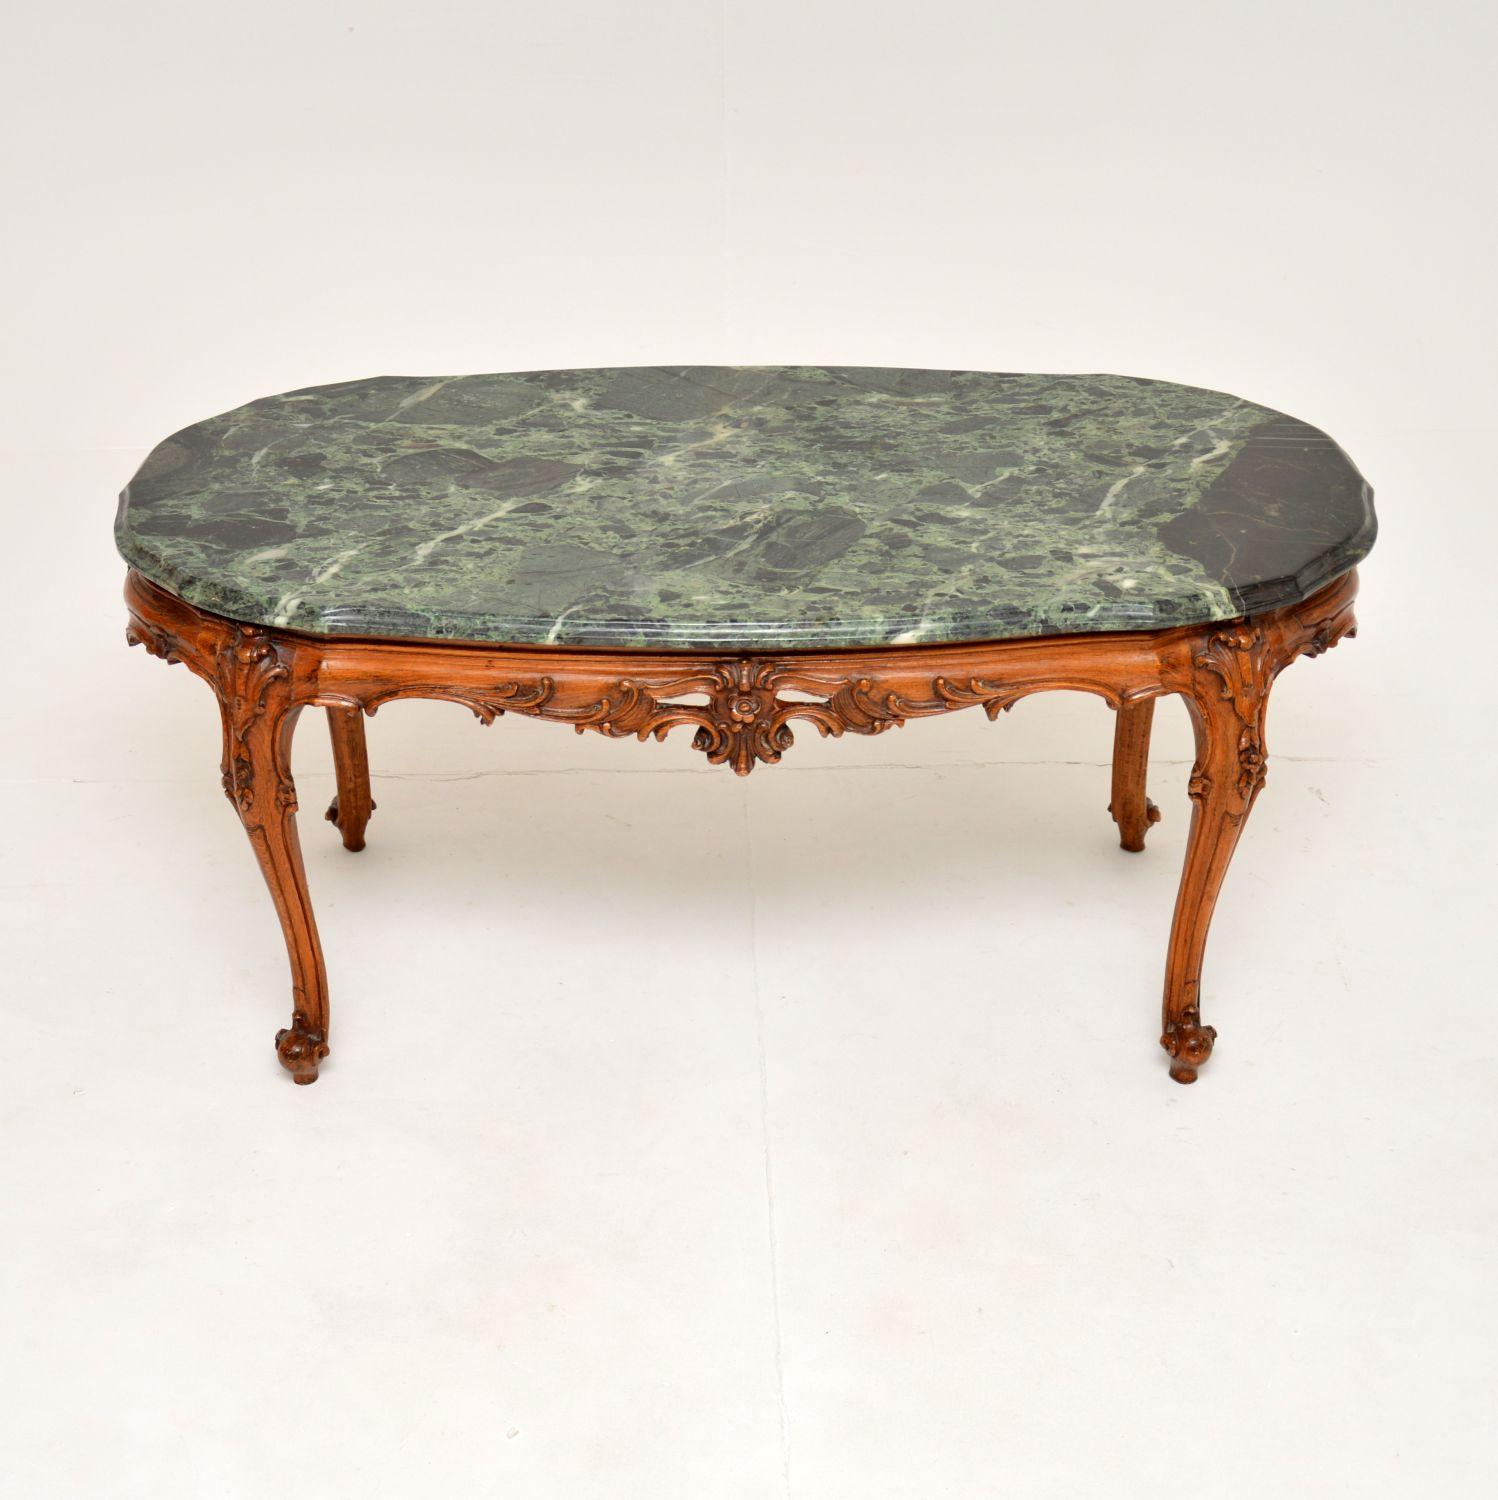 A superb antique French coffee table in carved solid walnut with a marble top. This was made in France and dates from around the 1920-30’s.

It is of outstanding quality, with stunning intricate carving throughout the base. The green marble top has